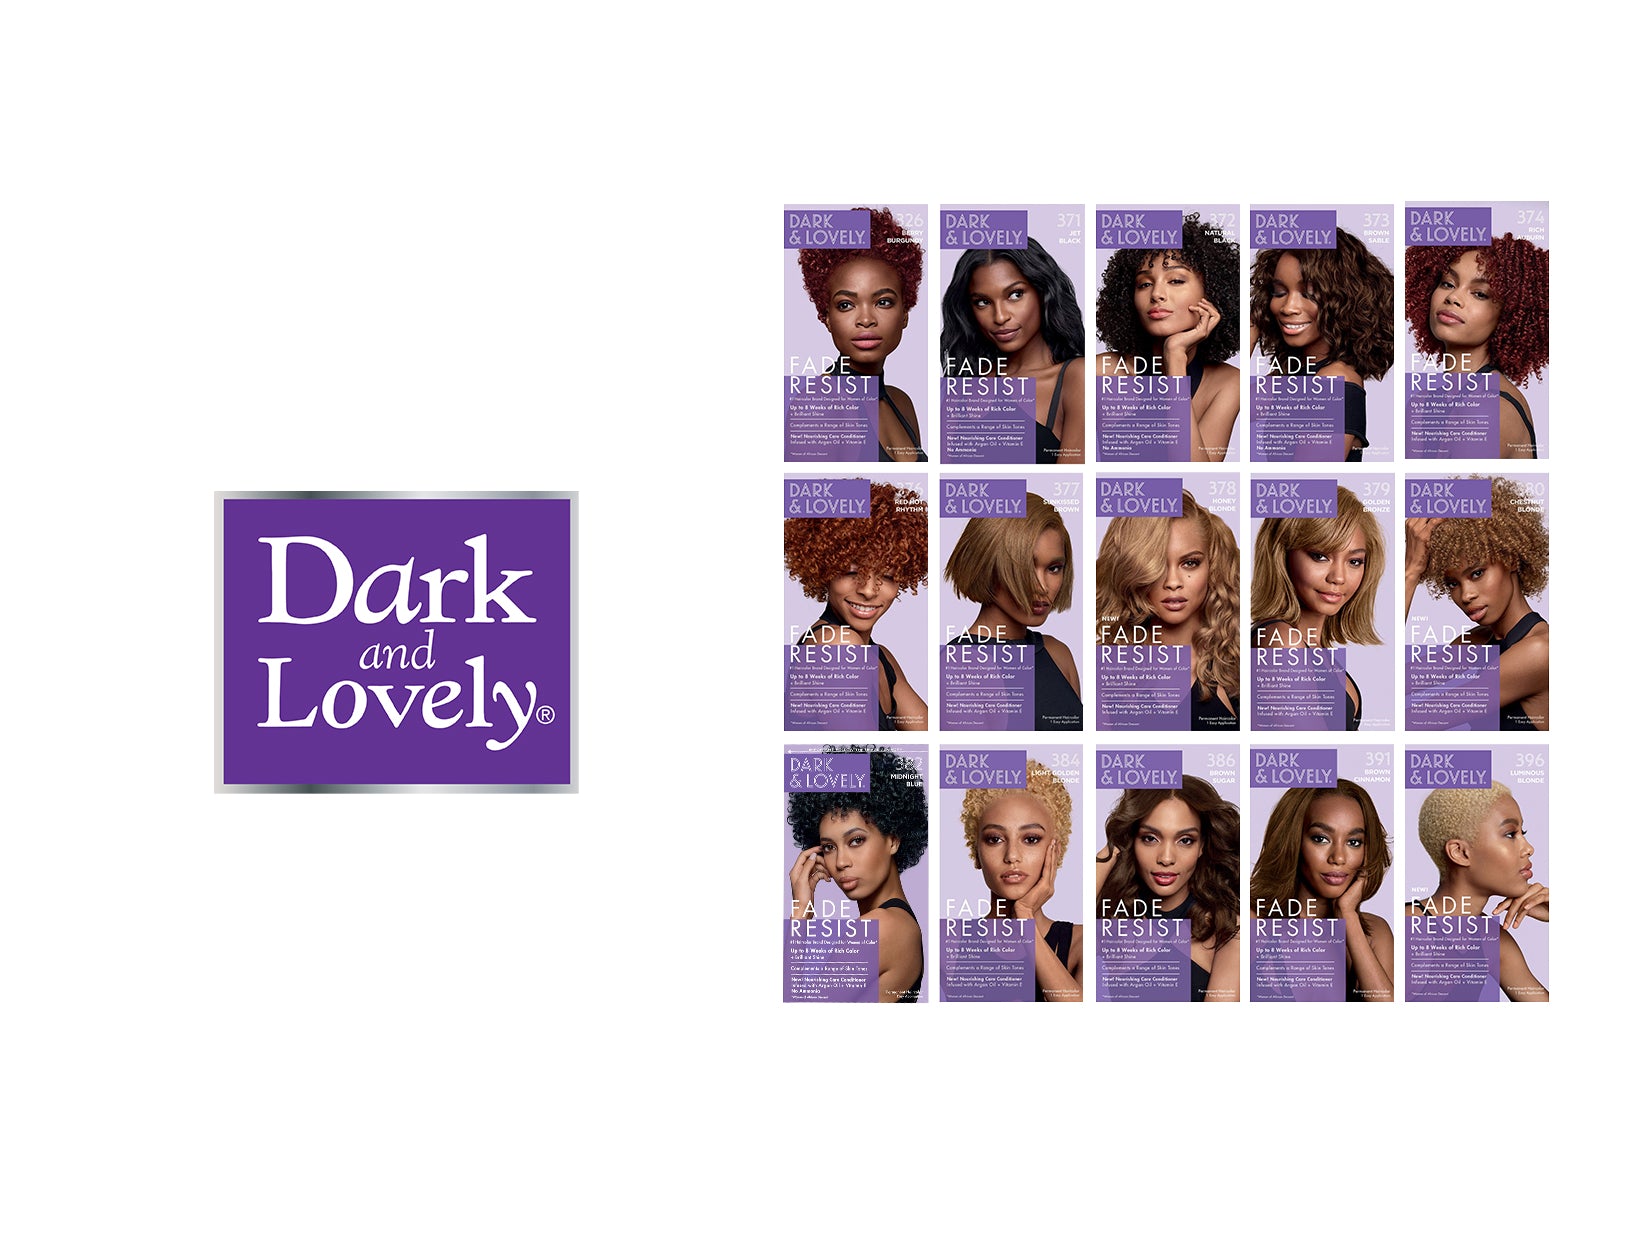 DARK AND LOVELY FADE RESIST RICH CONDITIONING COLOR KIT